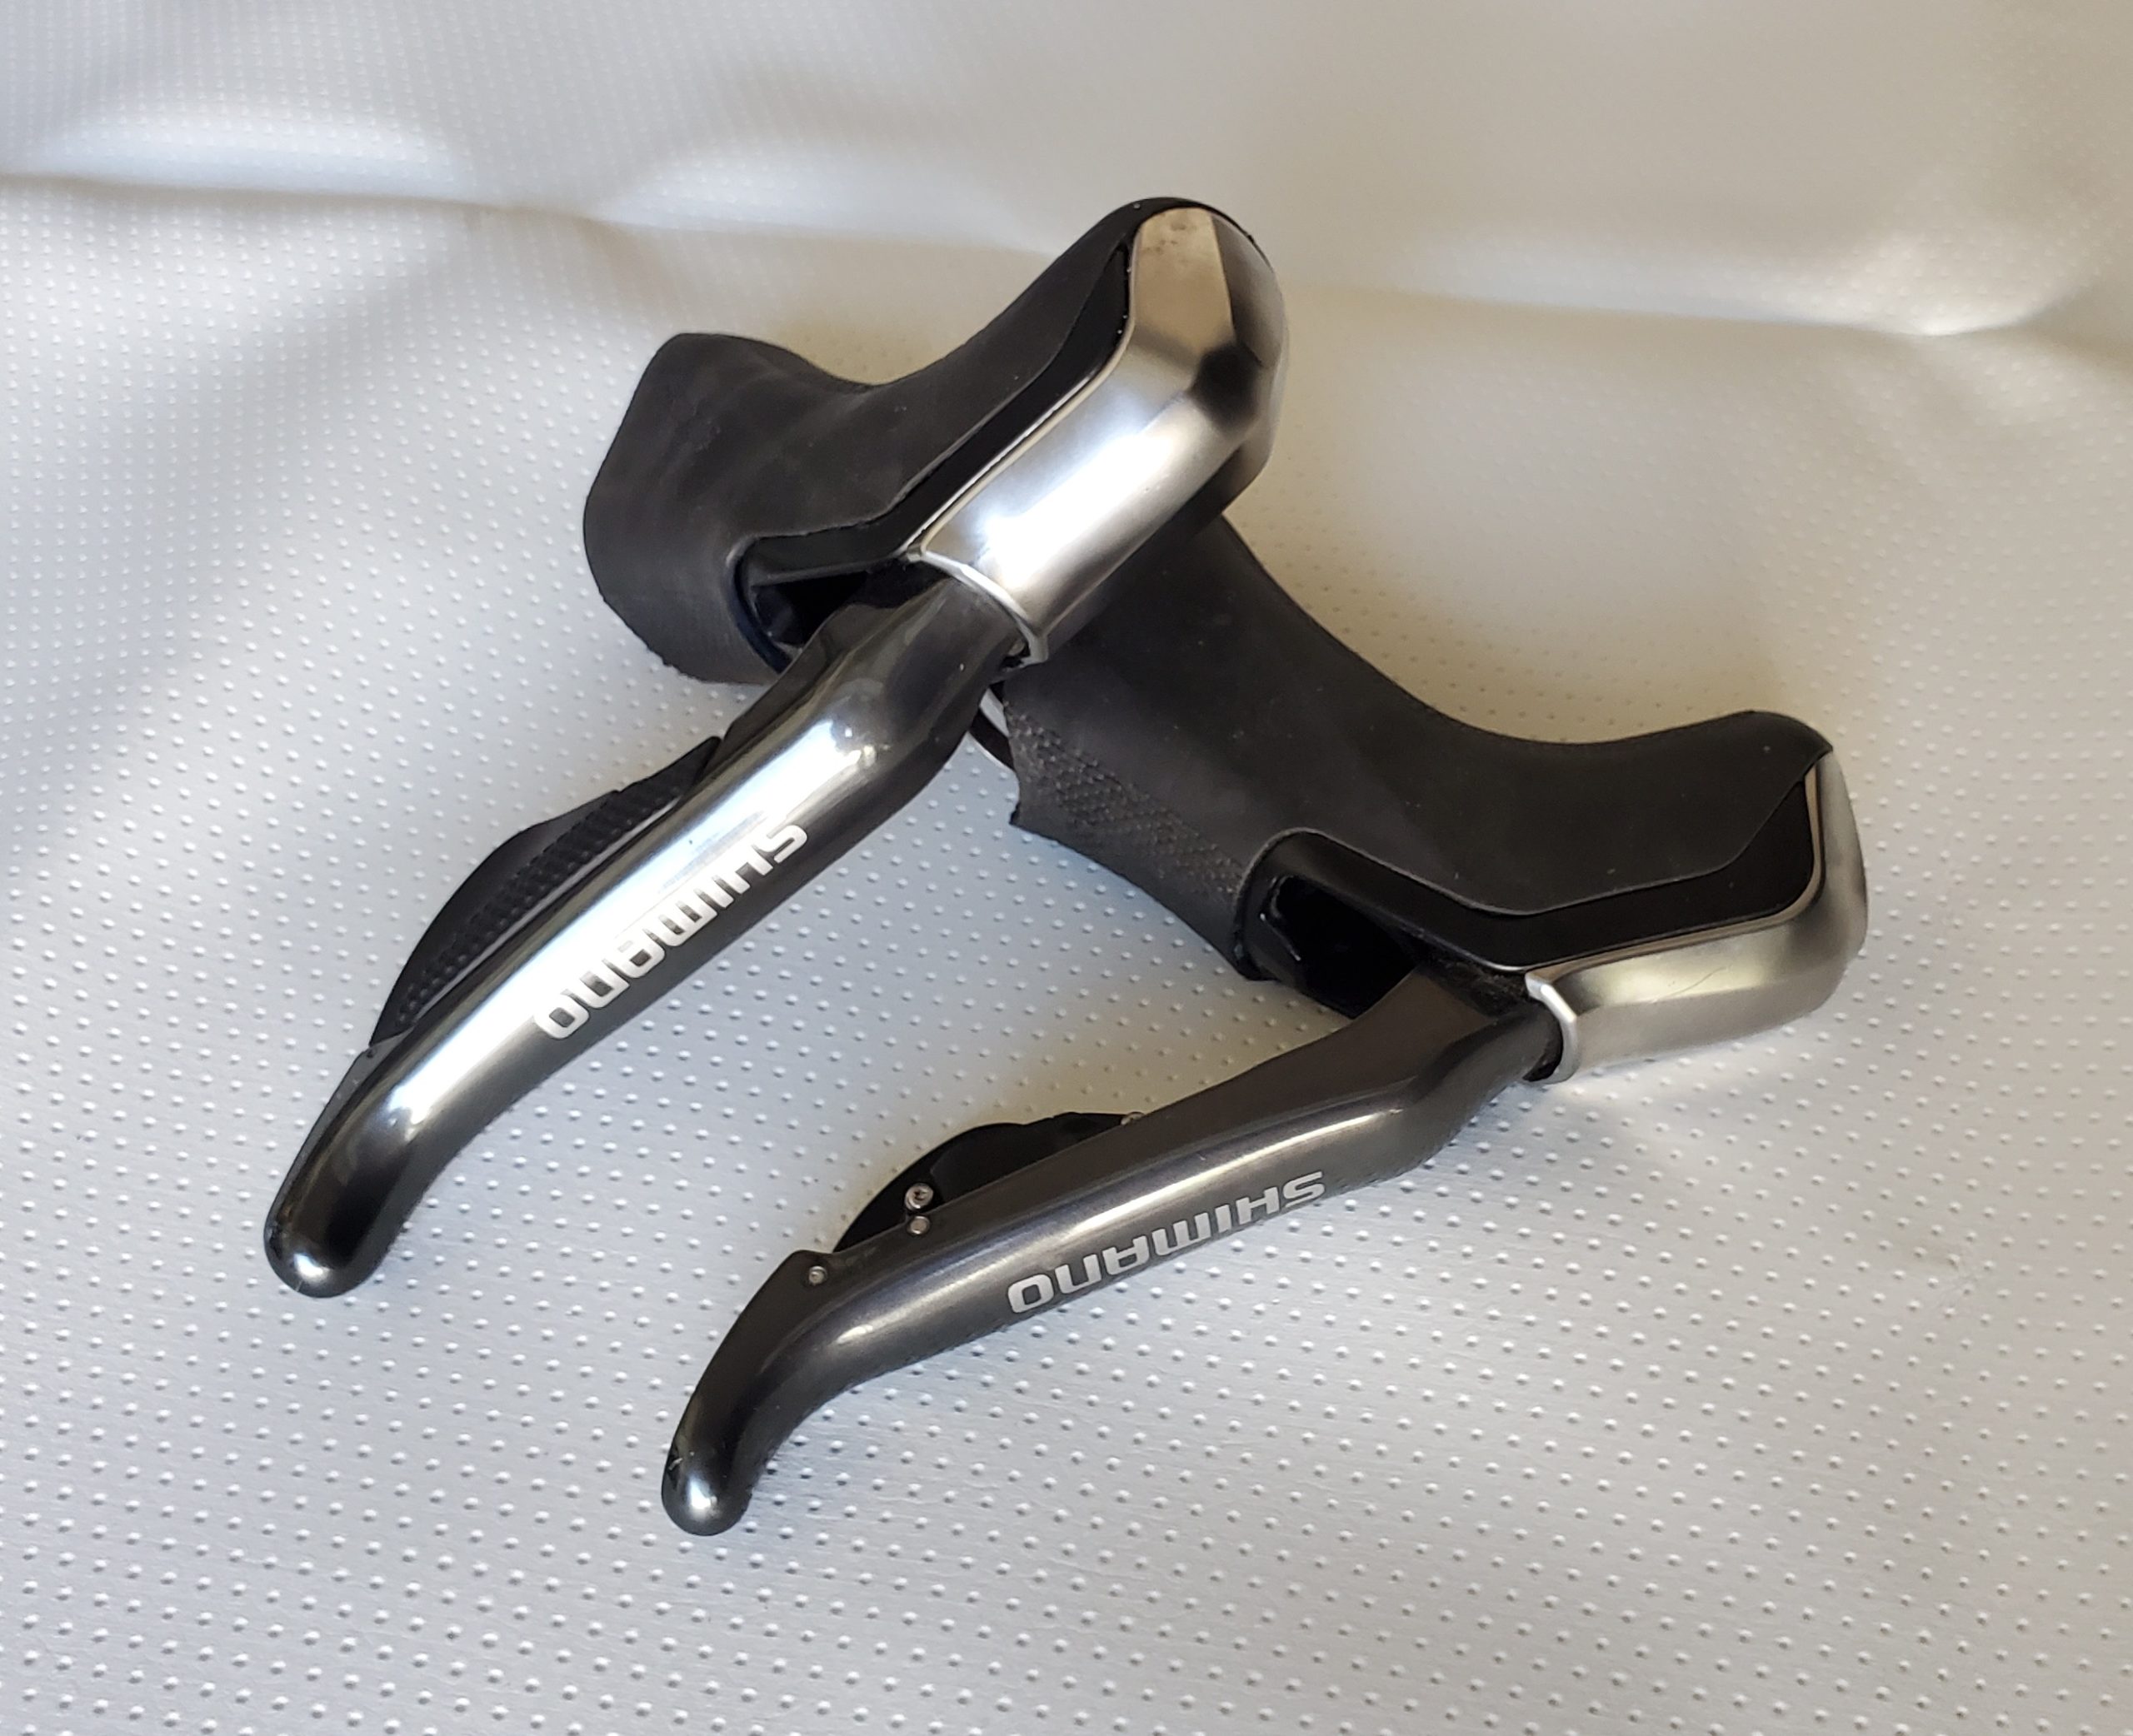 Shimano ST-R785 lever set (hydraulic, wired Di2)